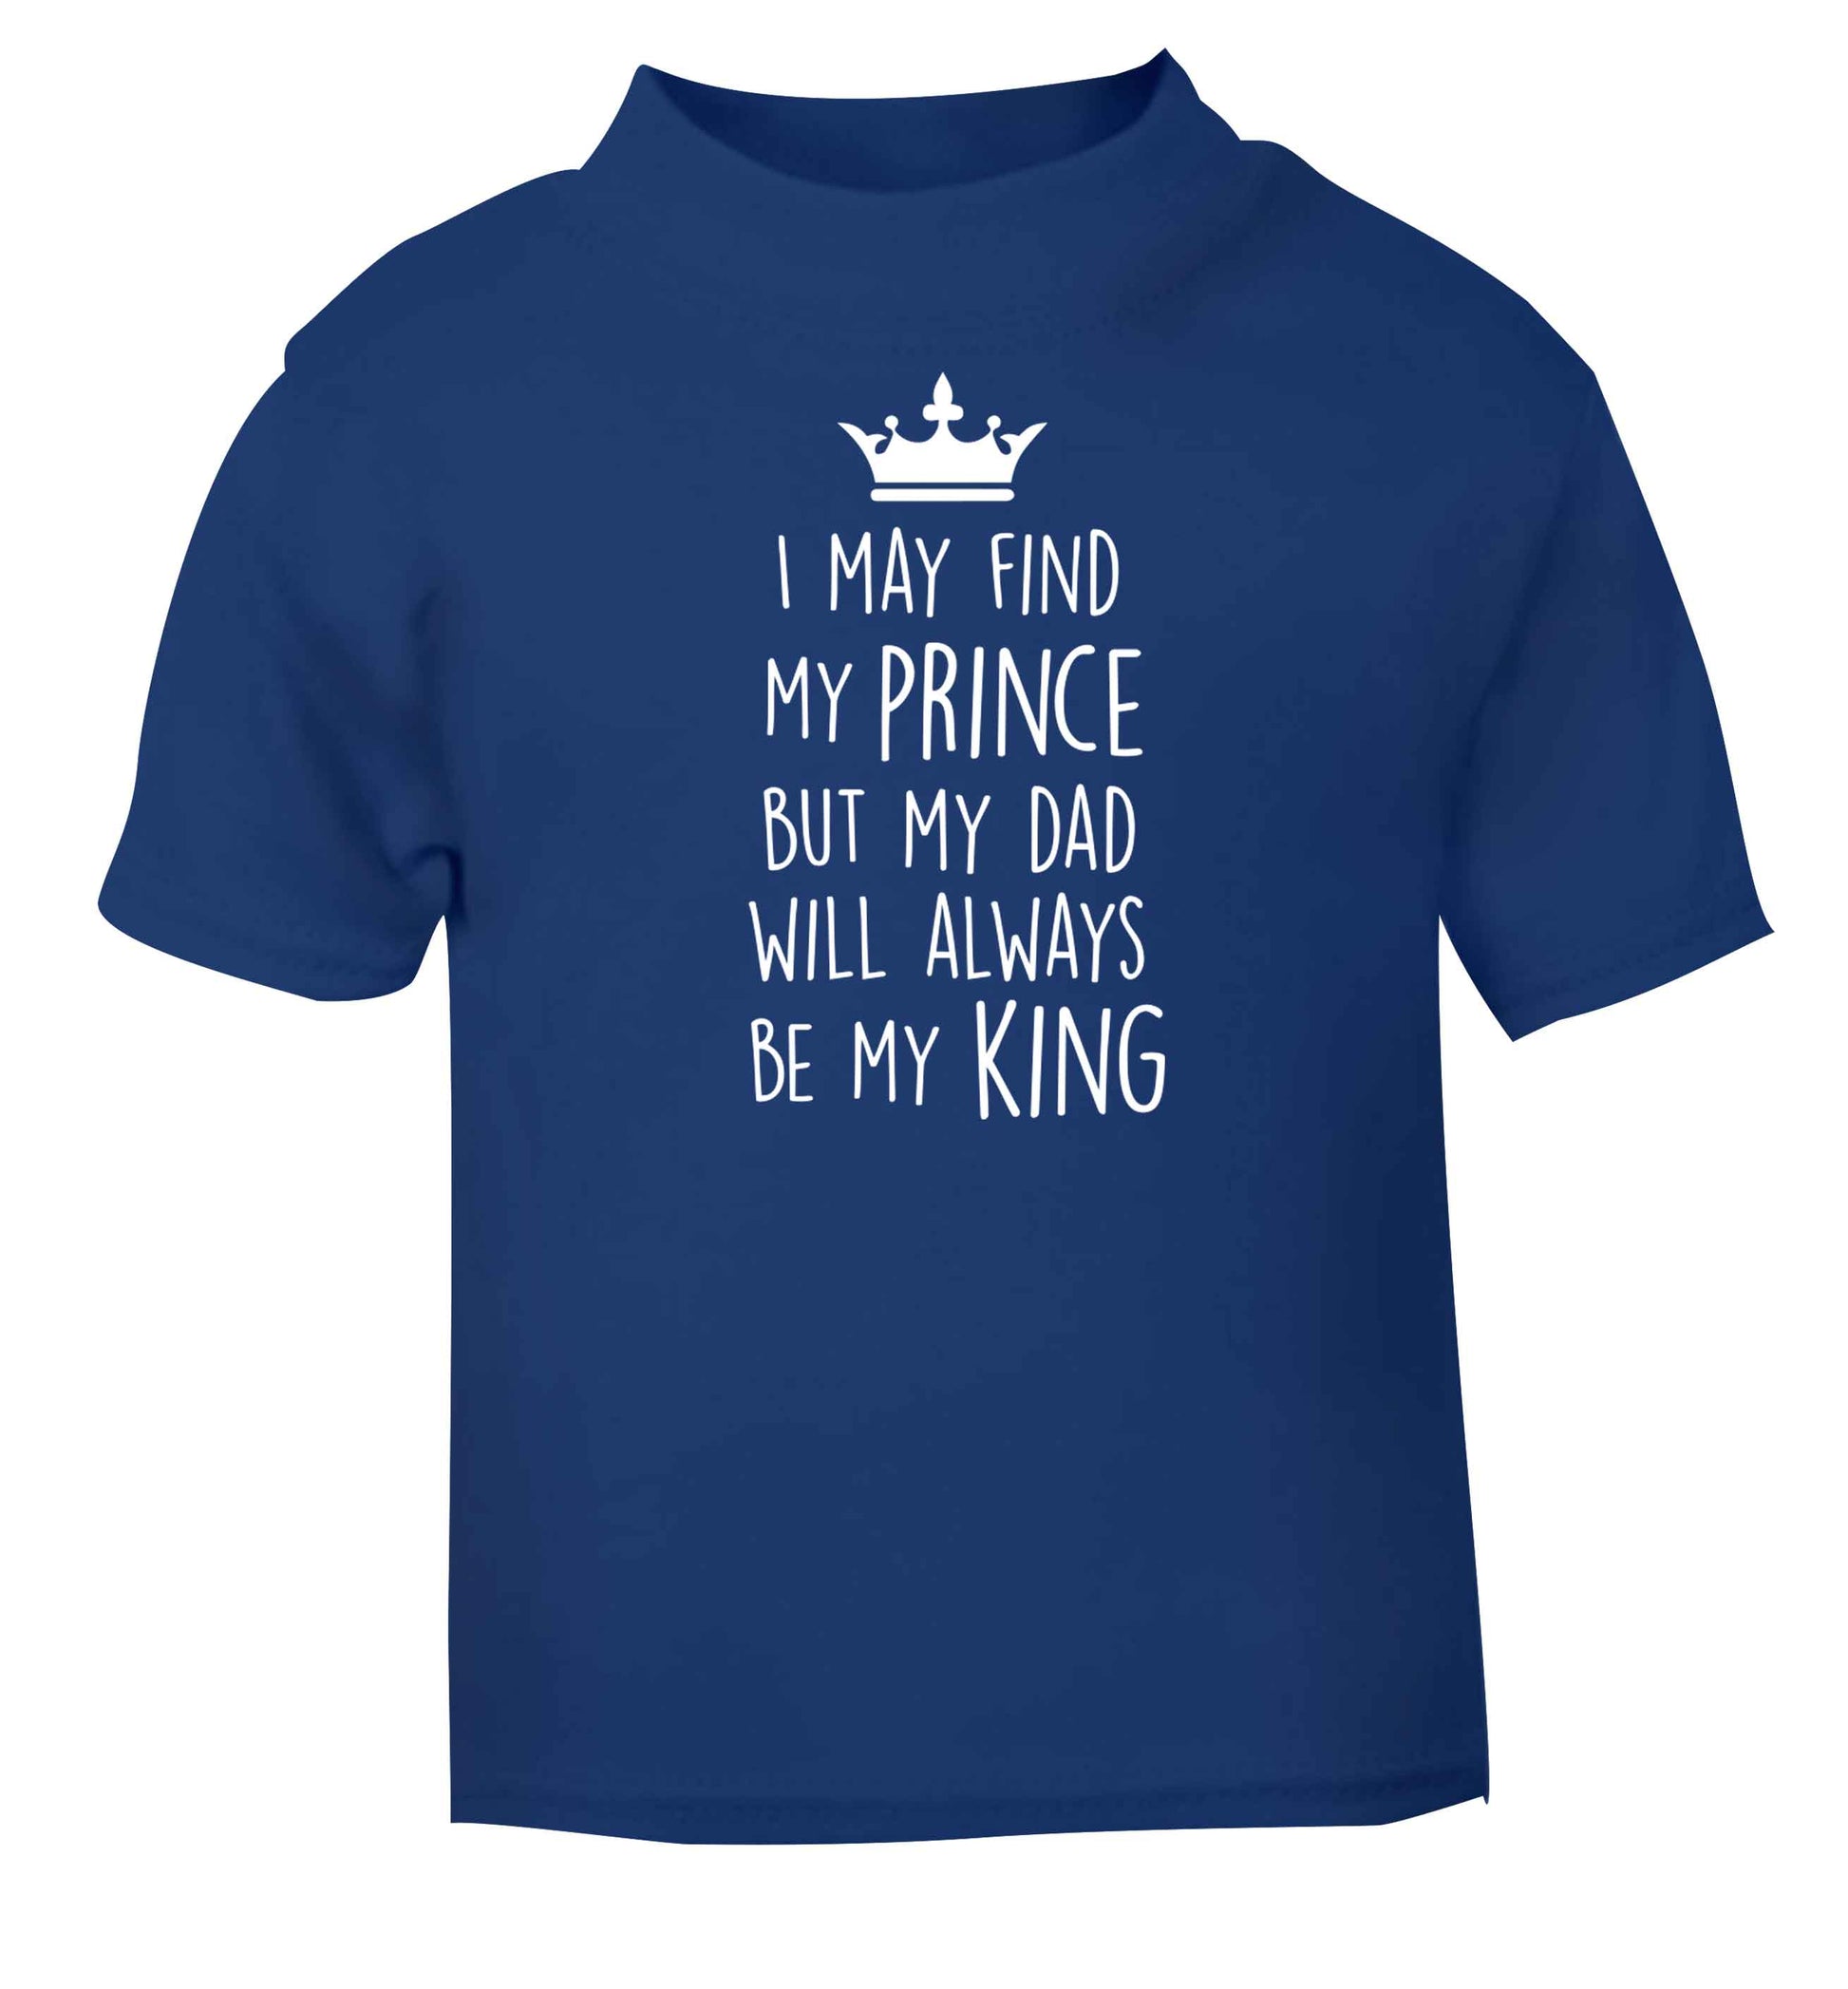 I may find my prince but my dad will always be my king blue baby toddler Tshirt 2 Years